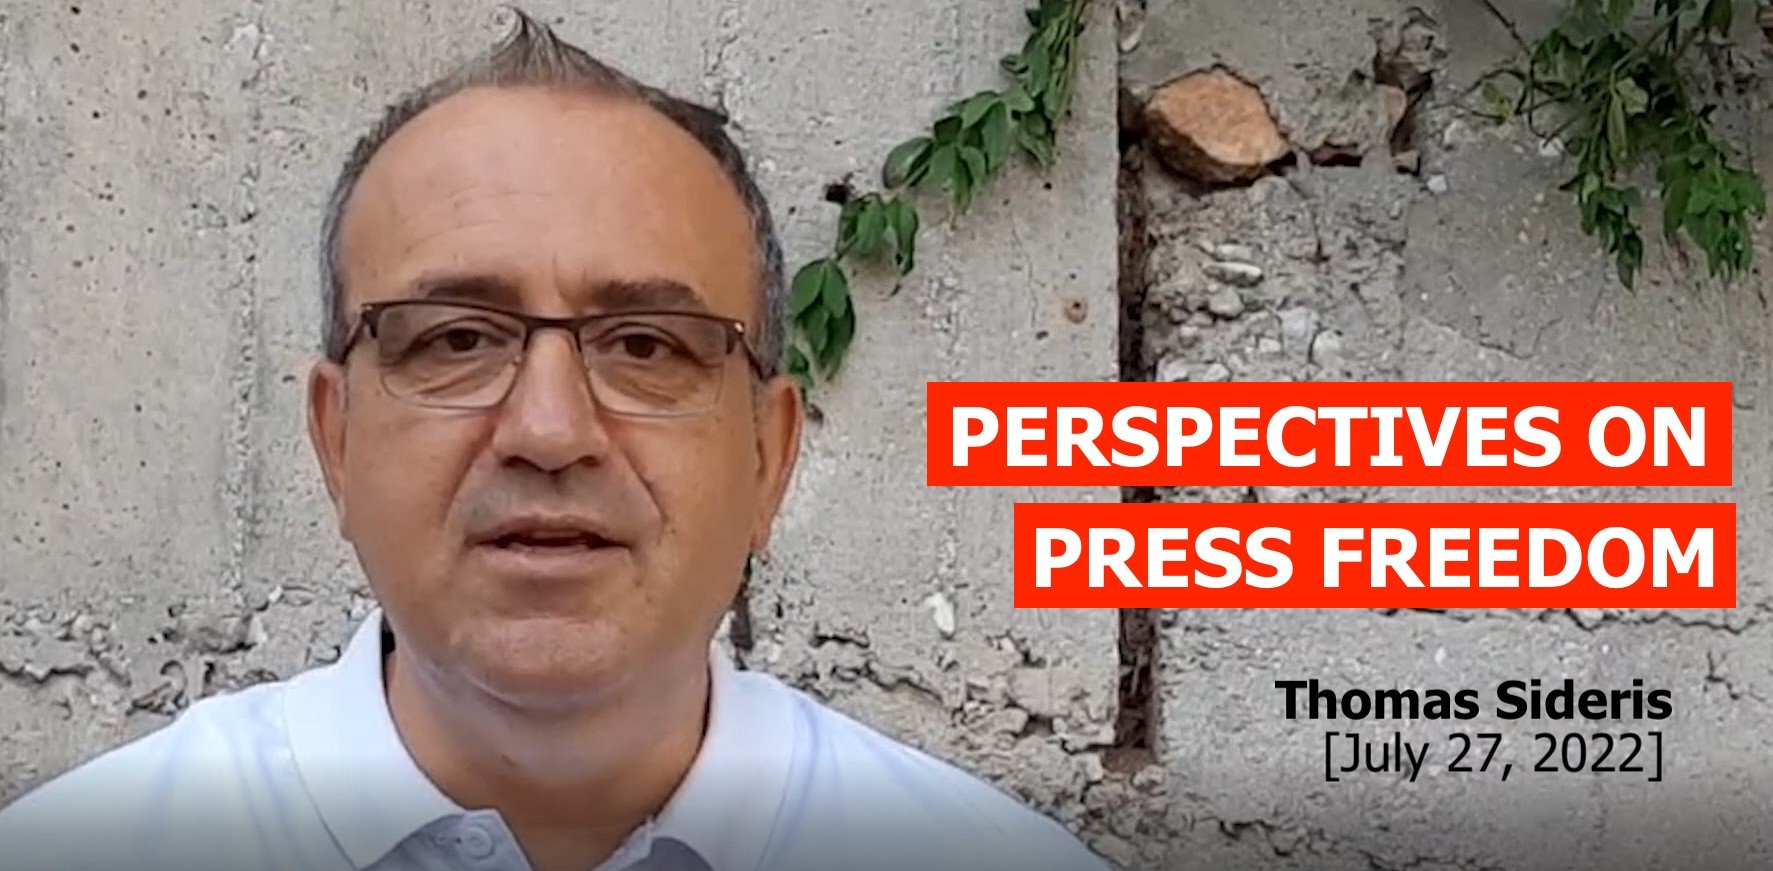 2-2-cover-photo-thomas-sideris-article-perspectives-on-press-freedom